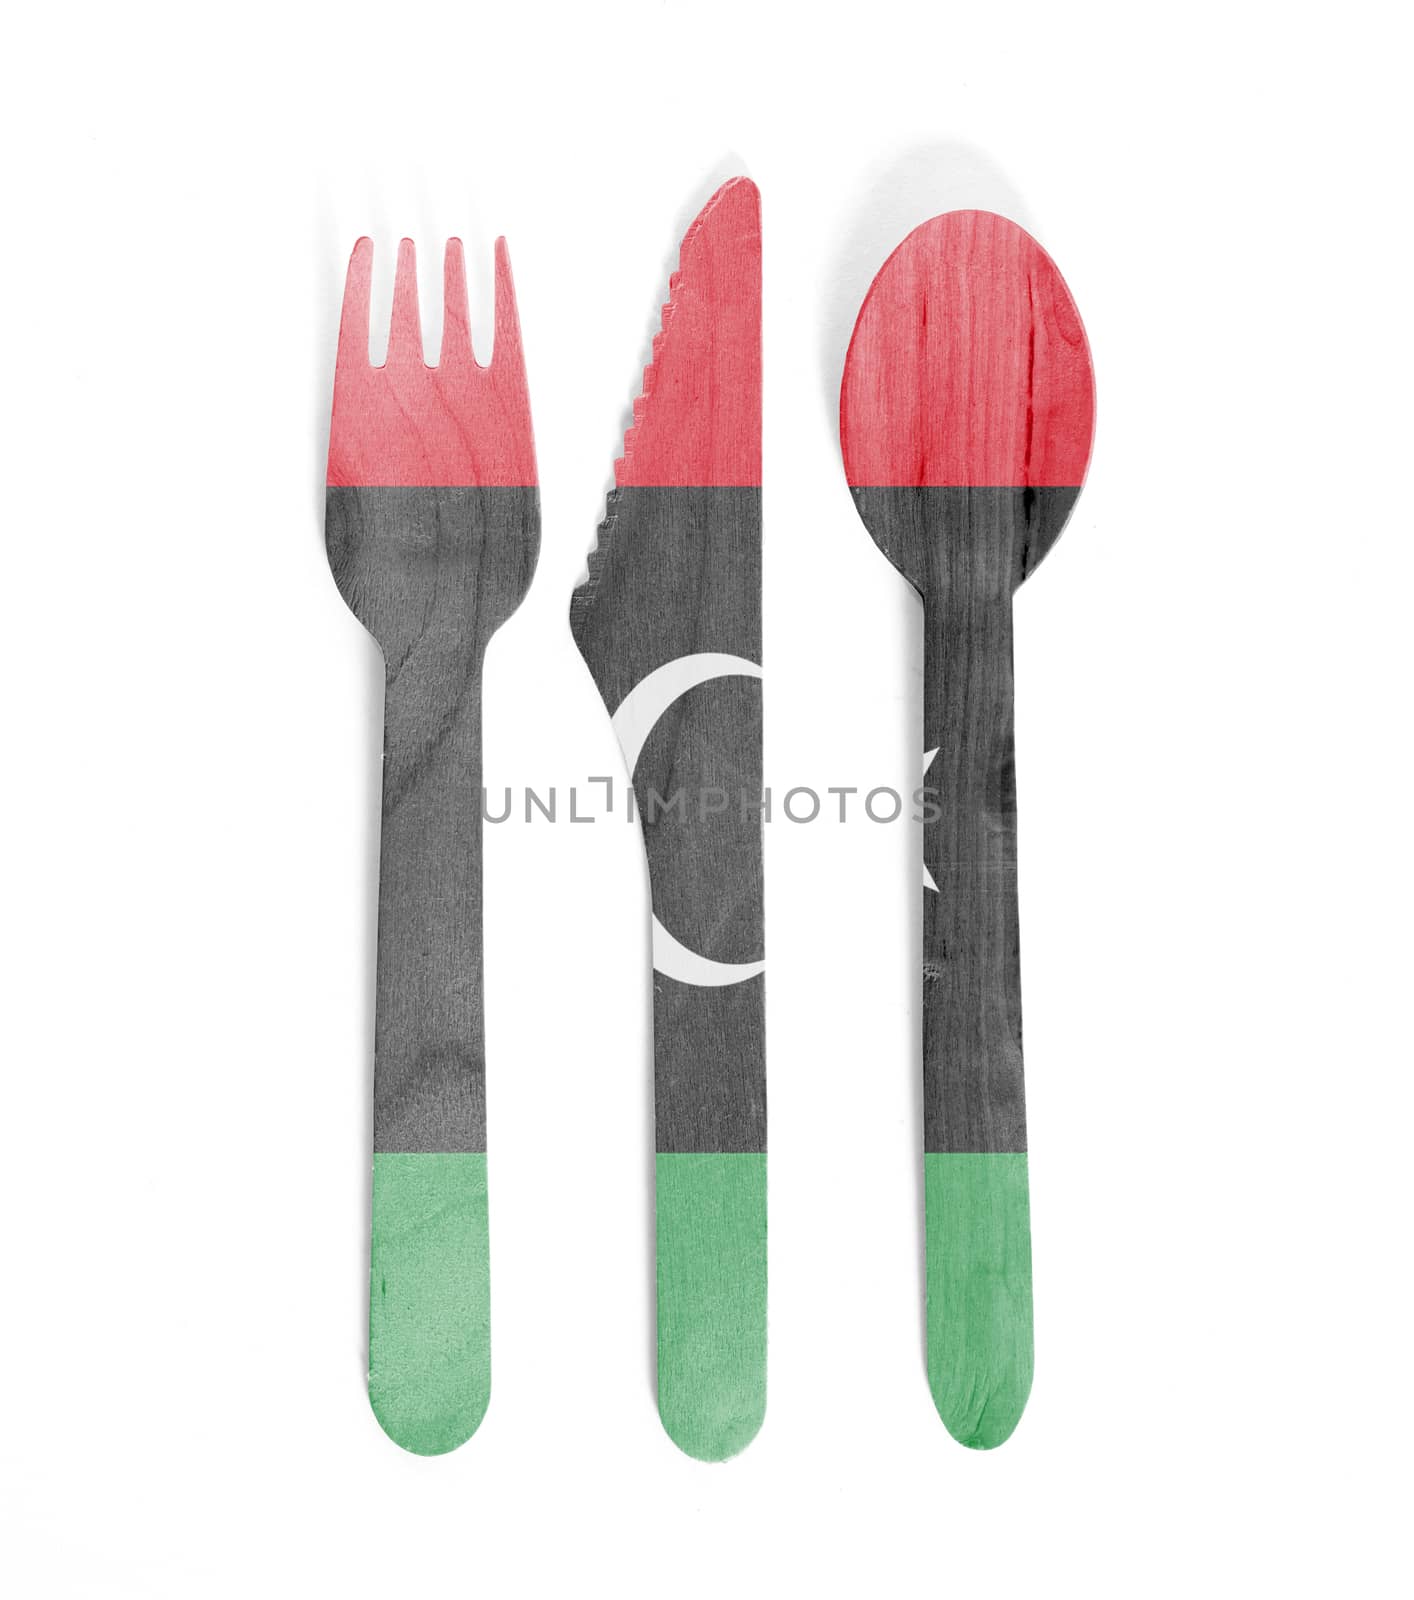 Eco friendly wooden cutlery - Plastic free concept - Flag of Lib by michaklootwijk